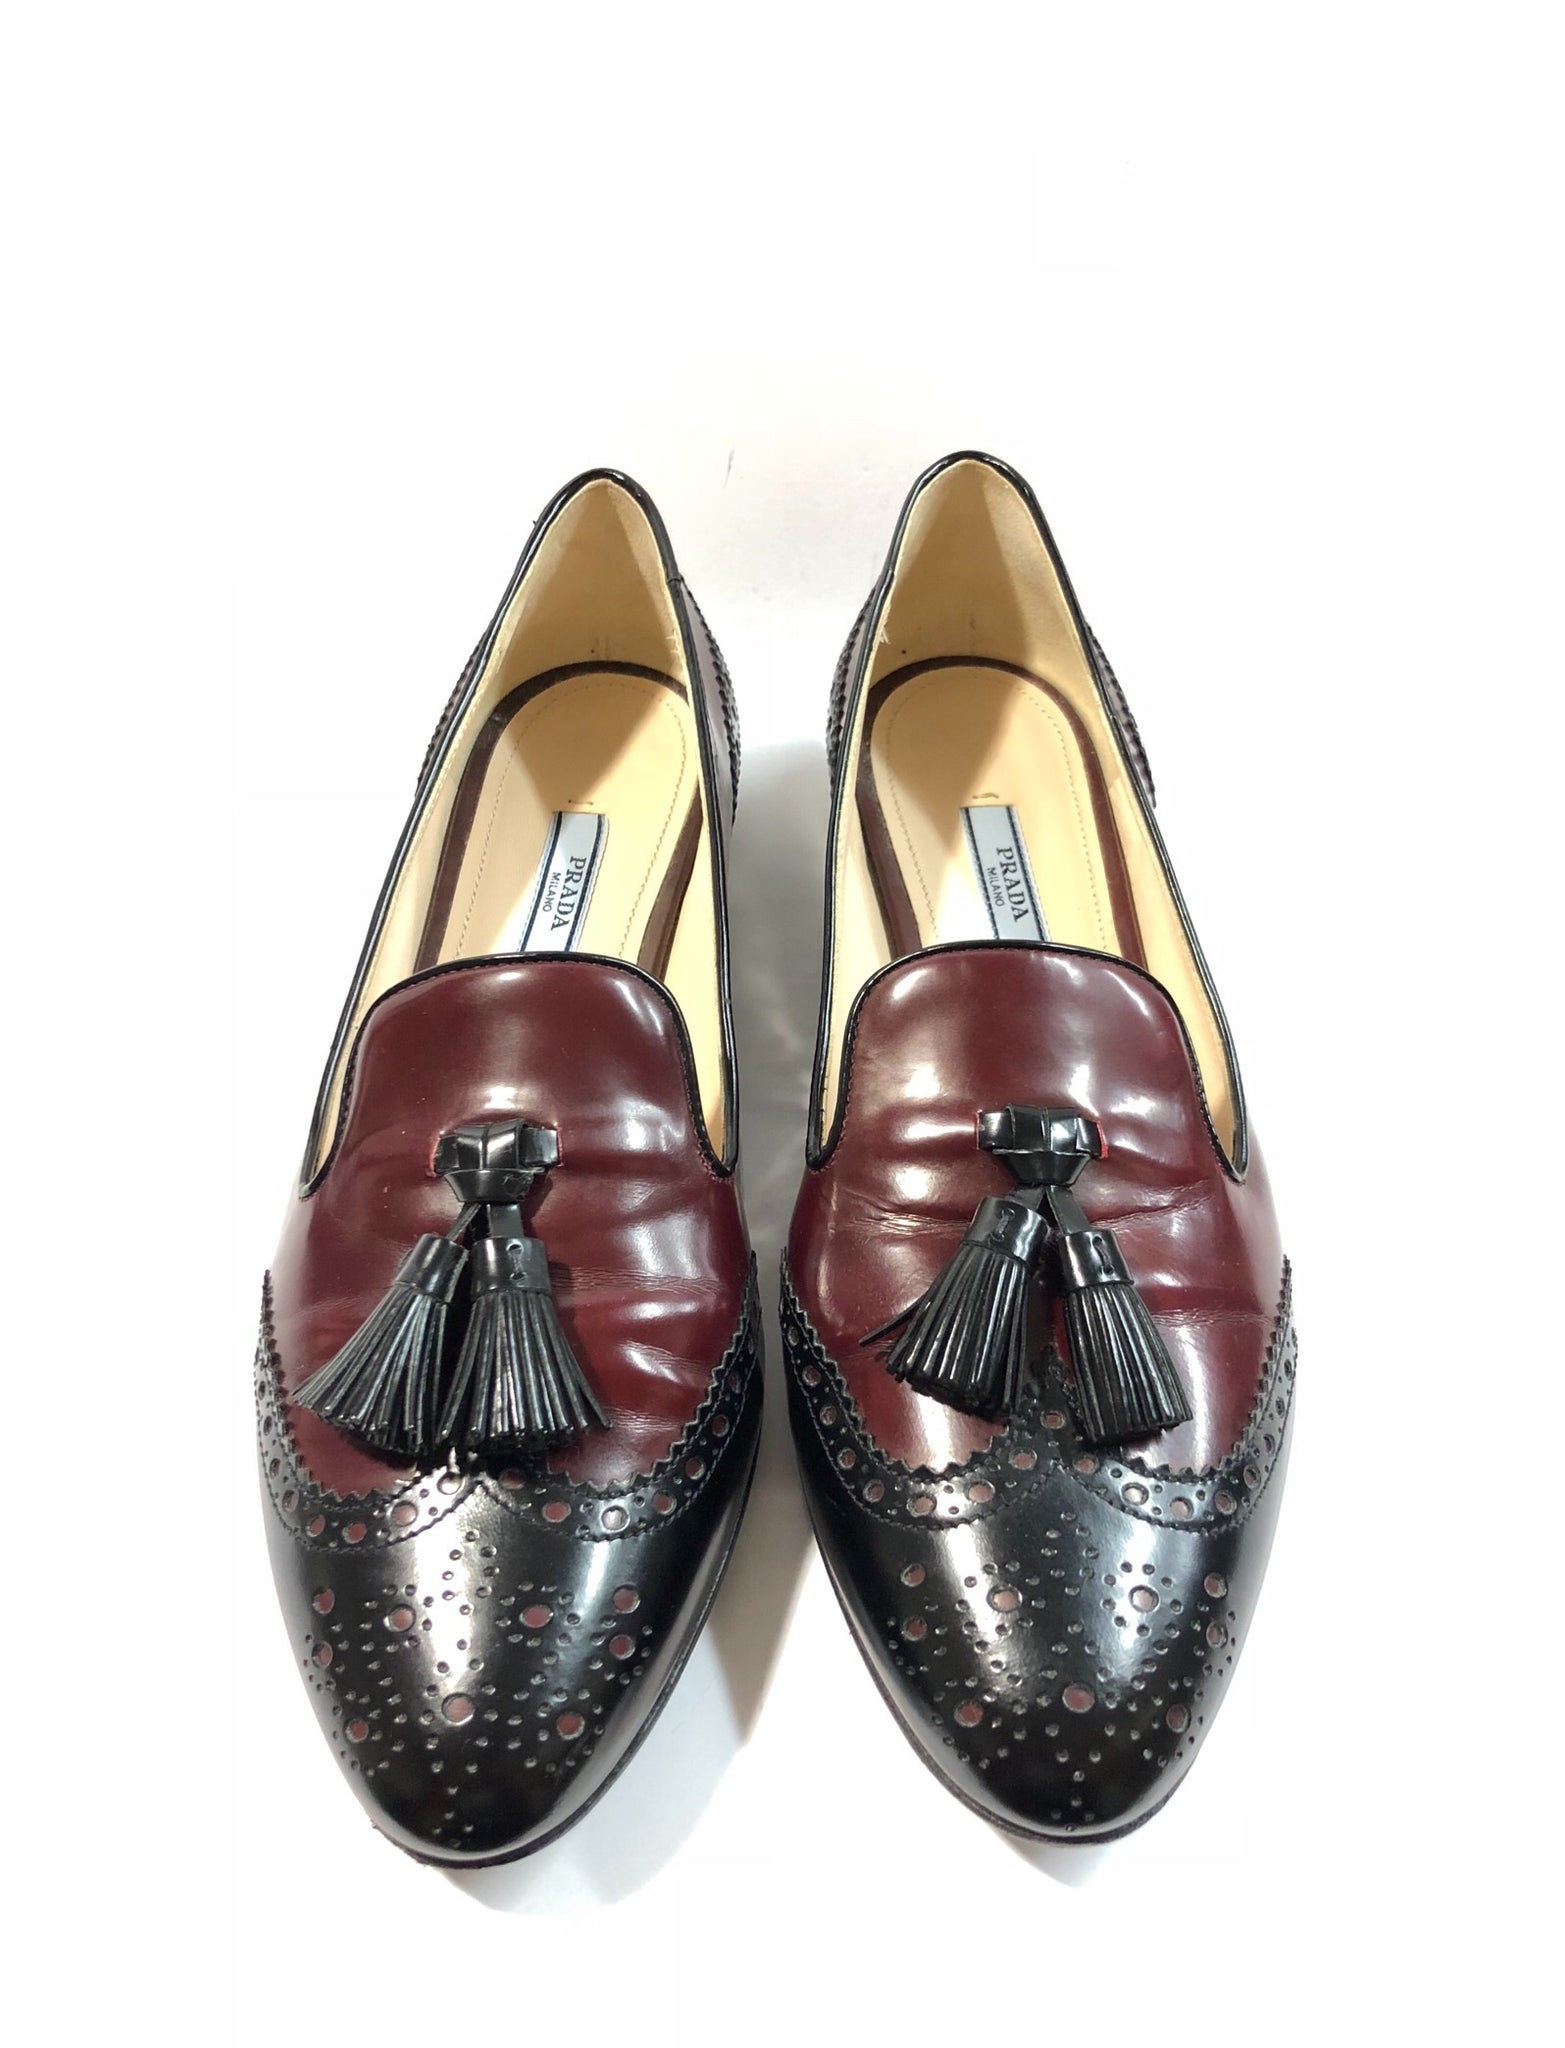 PRADA SPAZZOLATO WING TIP TASSEL LOAFER SIZE 38 – Chic Selects of Palm Beach